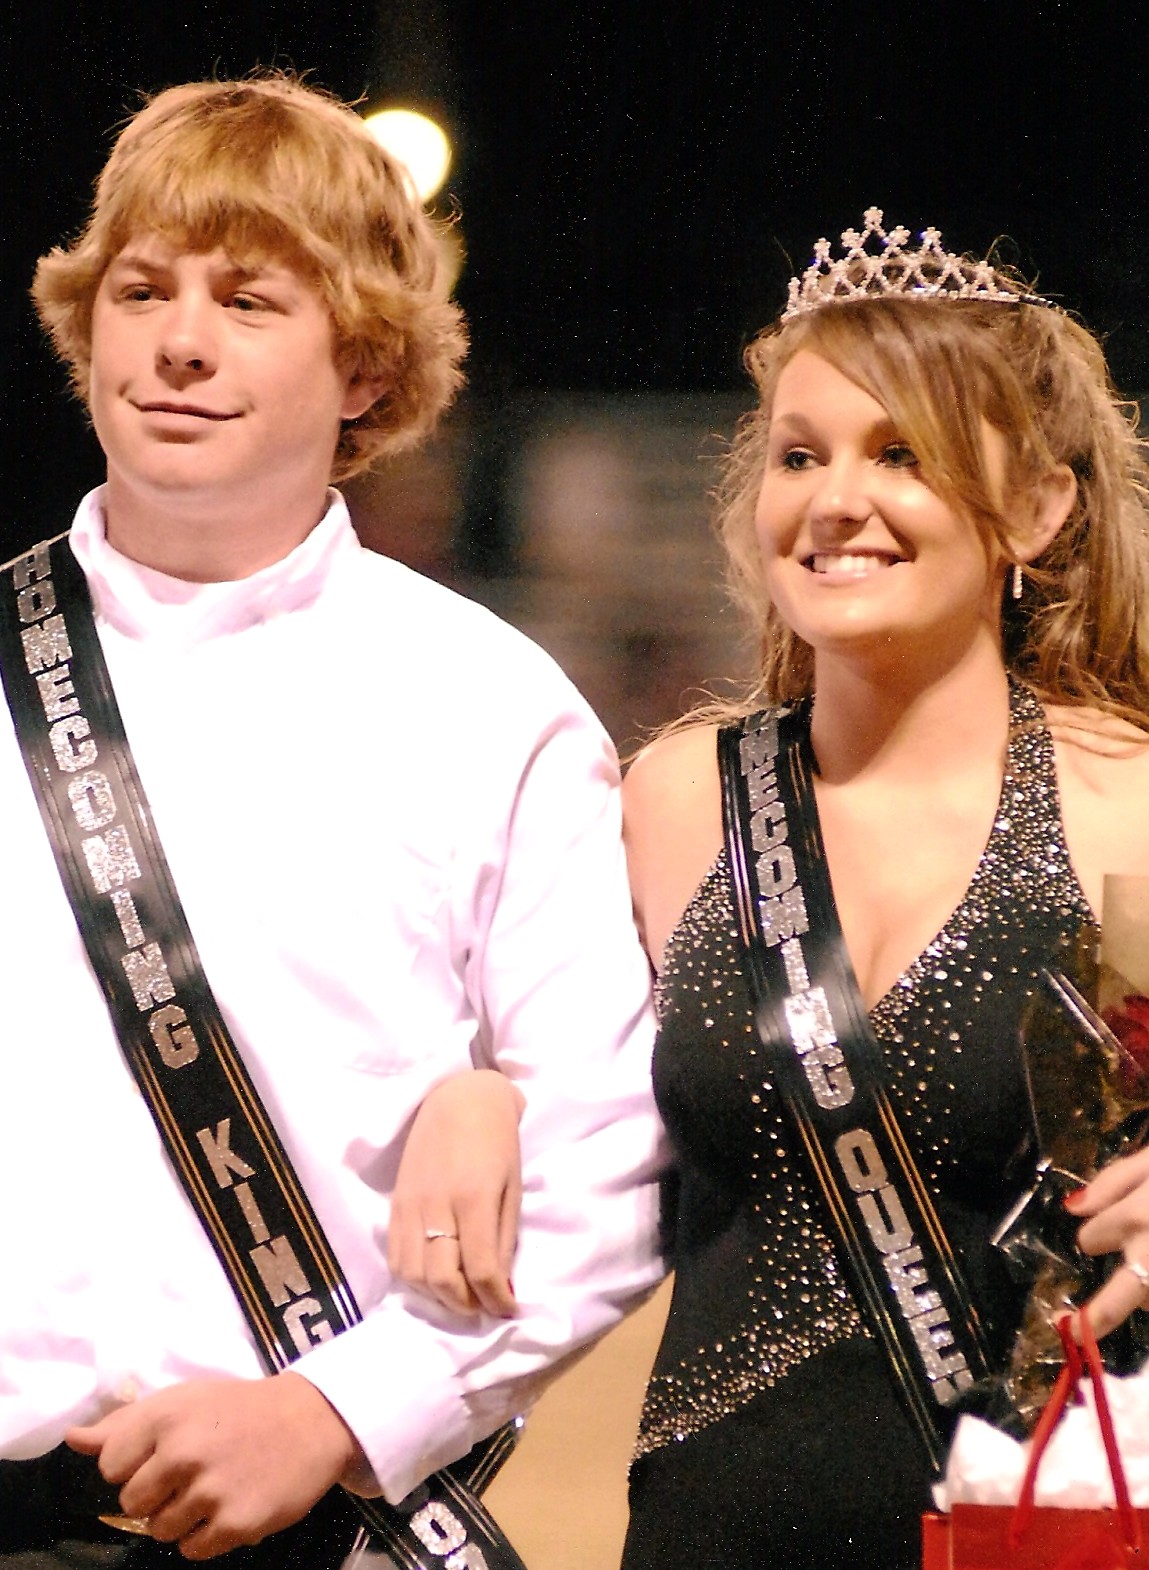 [CLAY+AND+SARAH+WOOD+HOMECOMING+KING+AND+QUEEN+11+07.jpg]